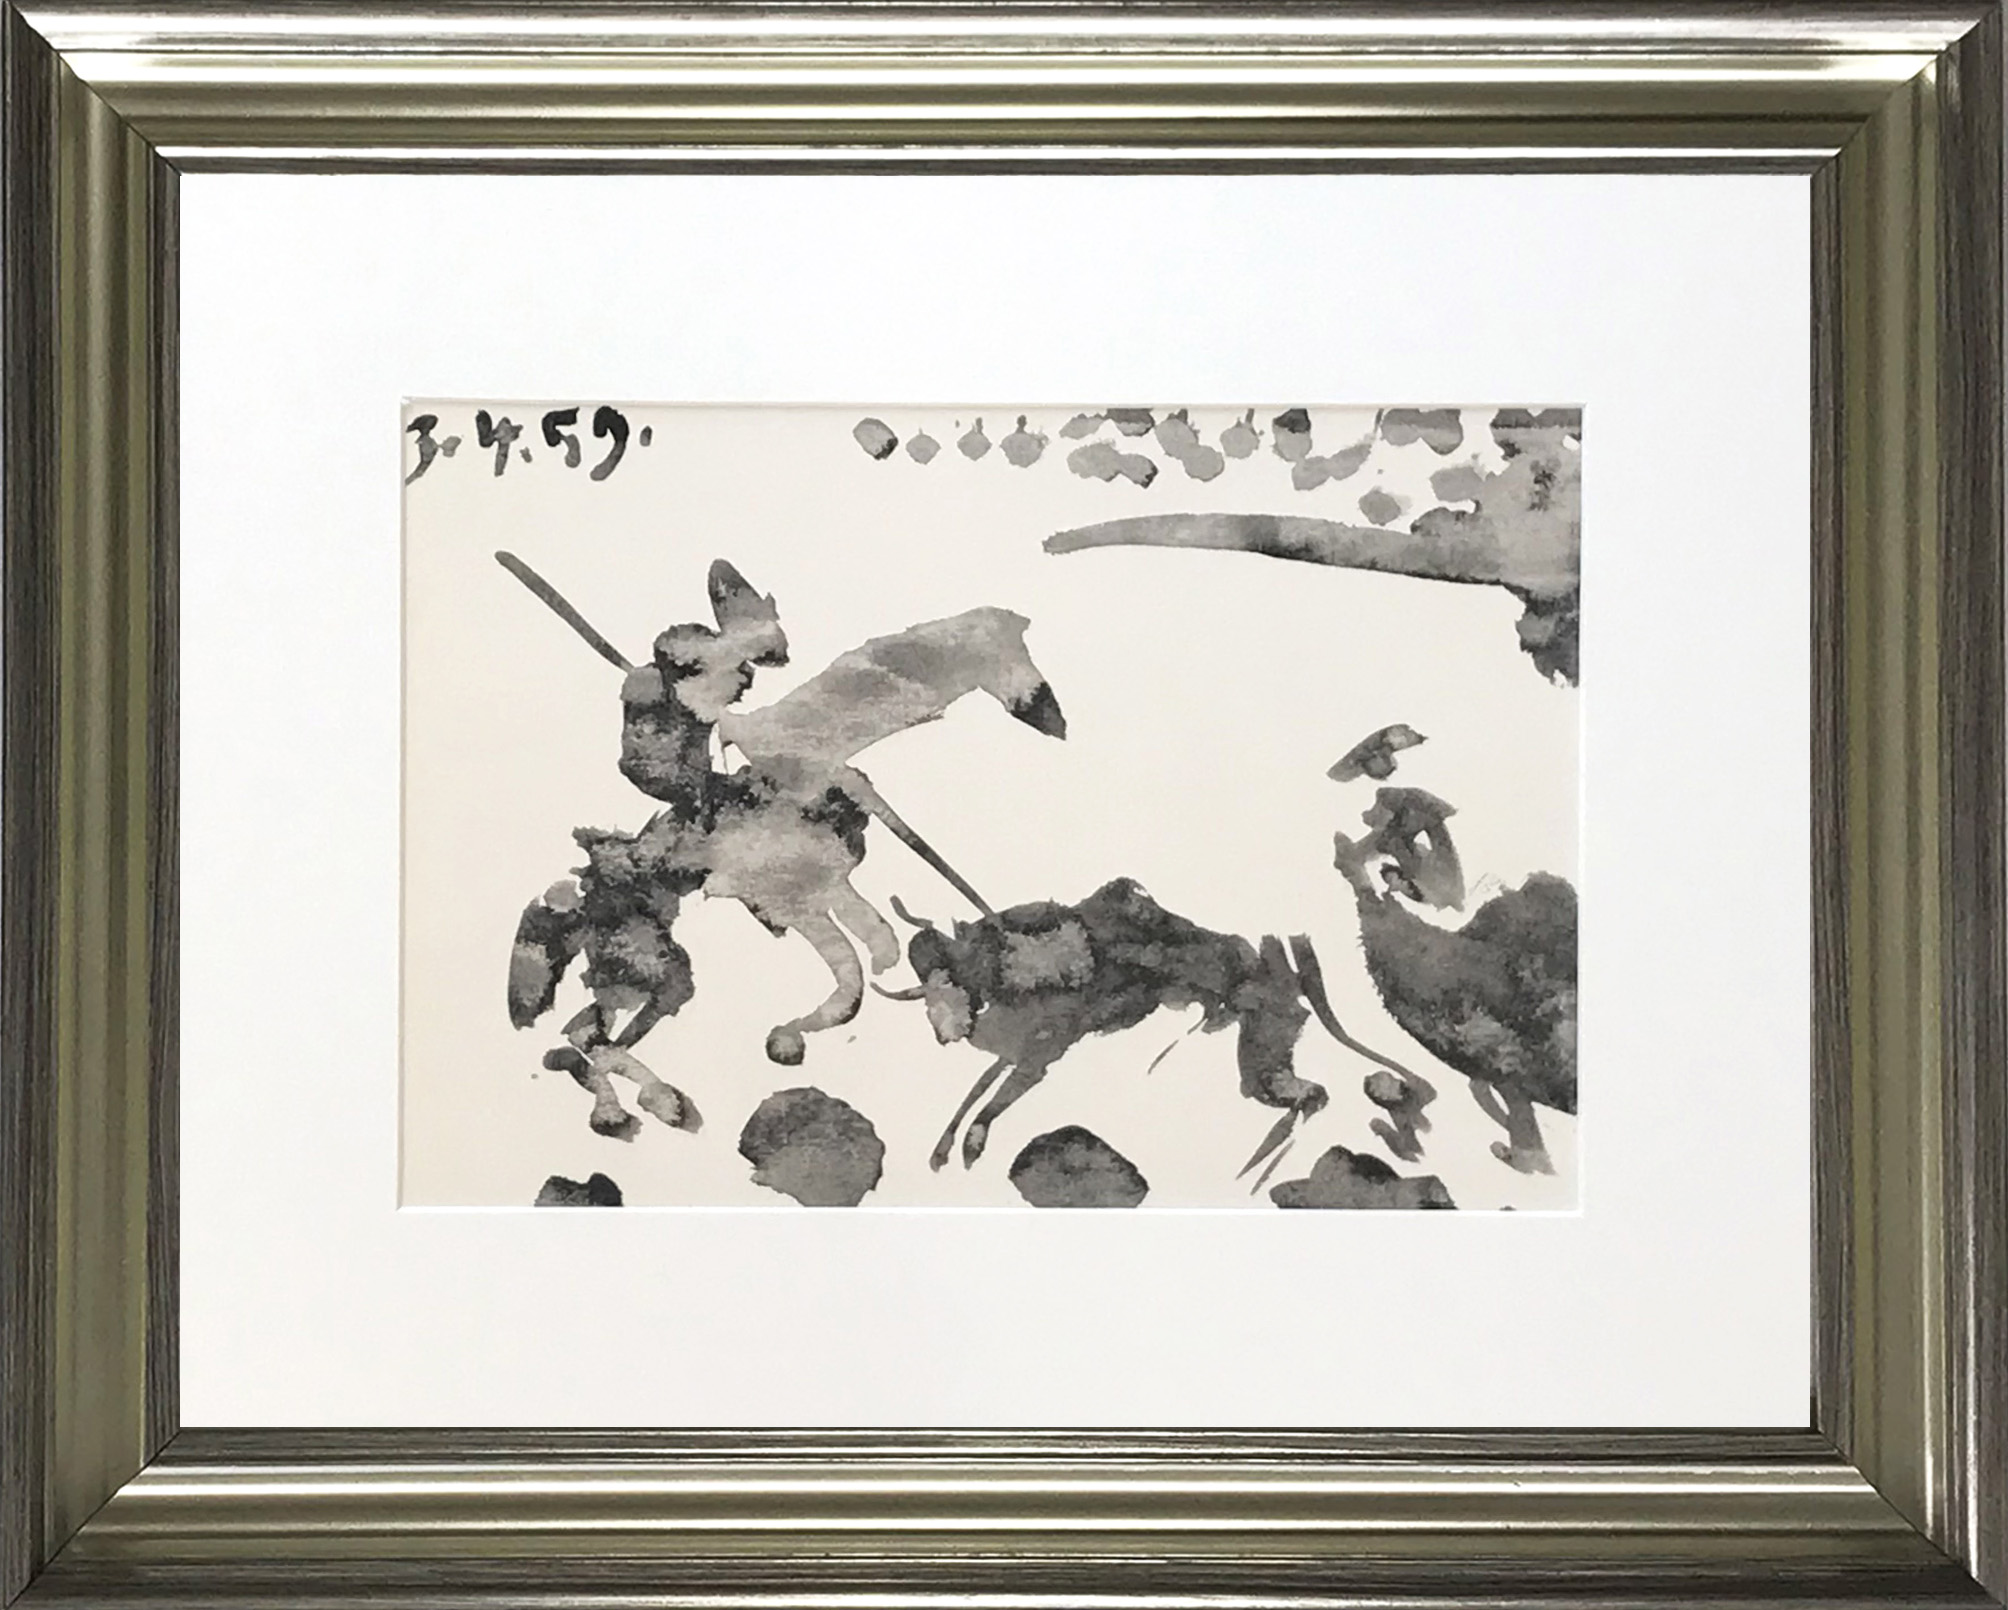 Picasso Toros Y Toreros 1961 framed S2 dated 3/4/59